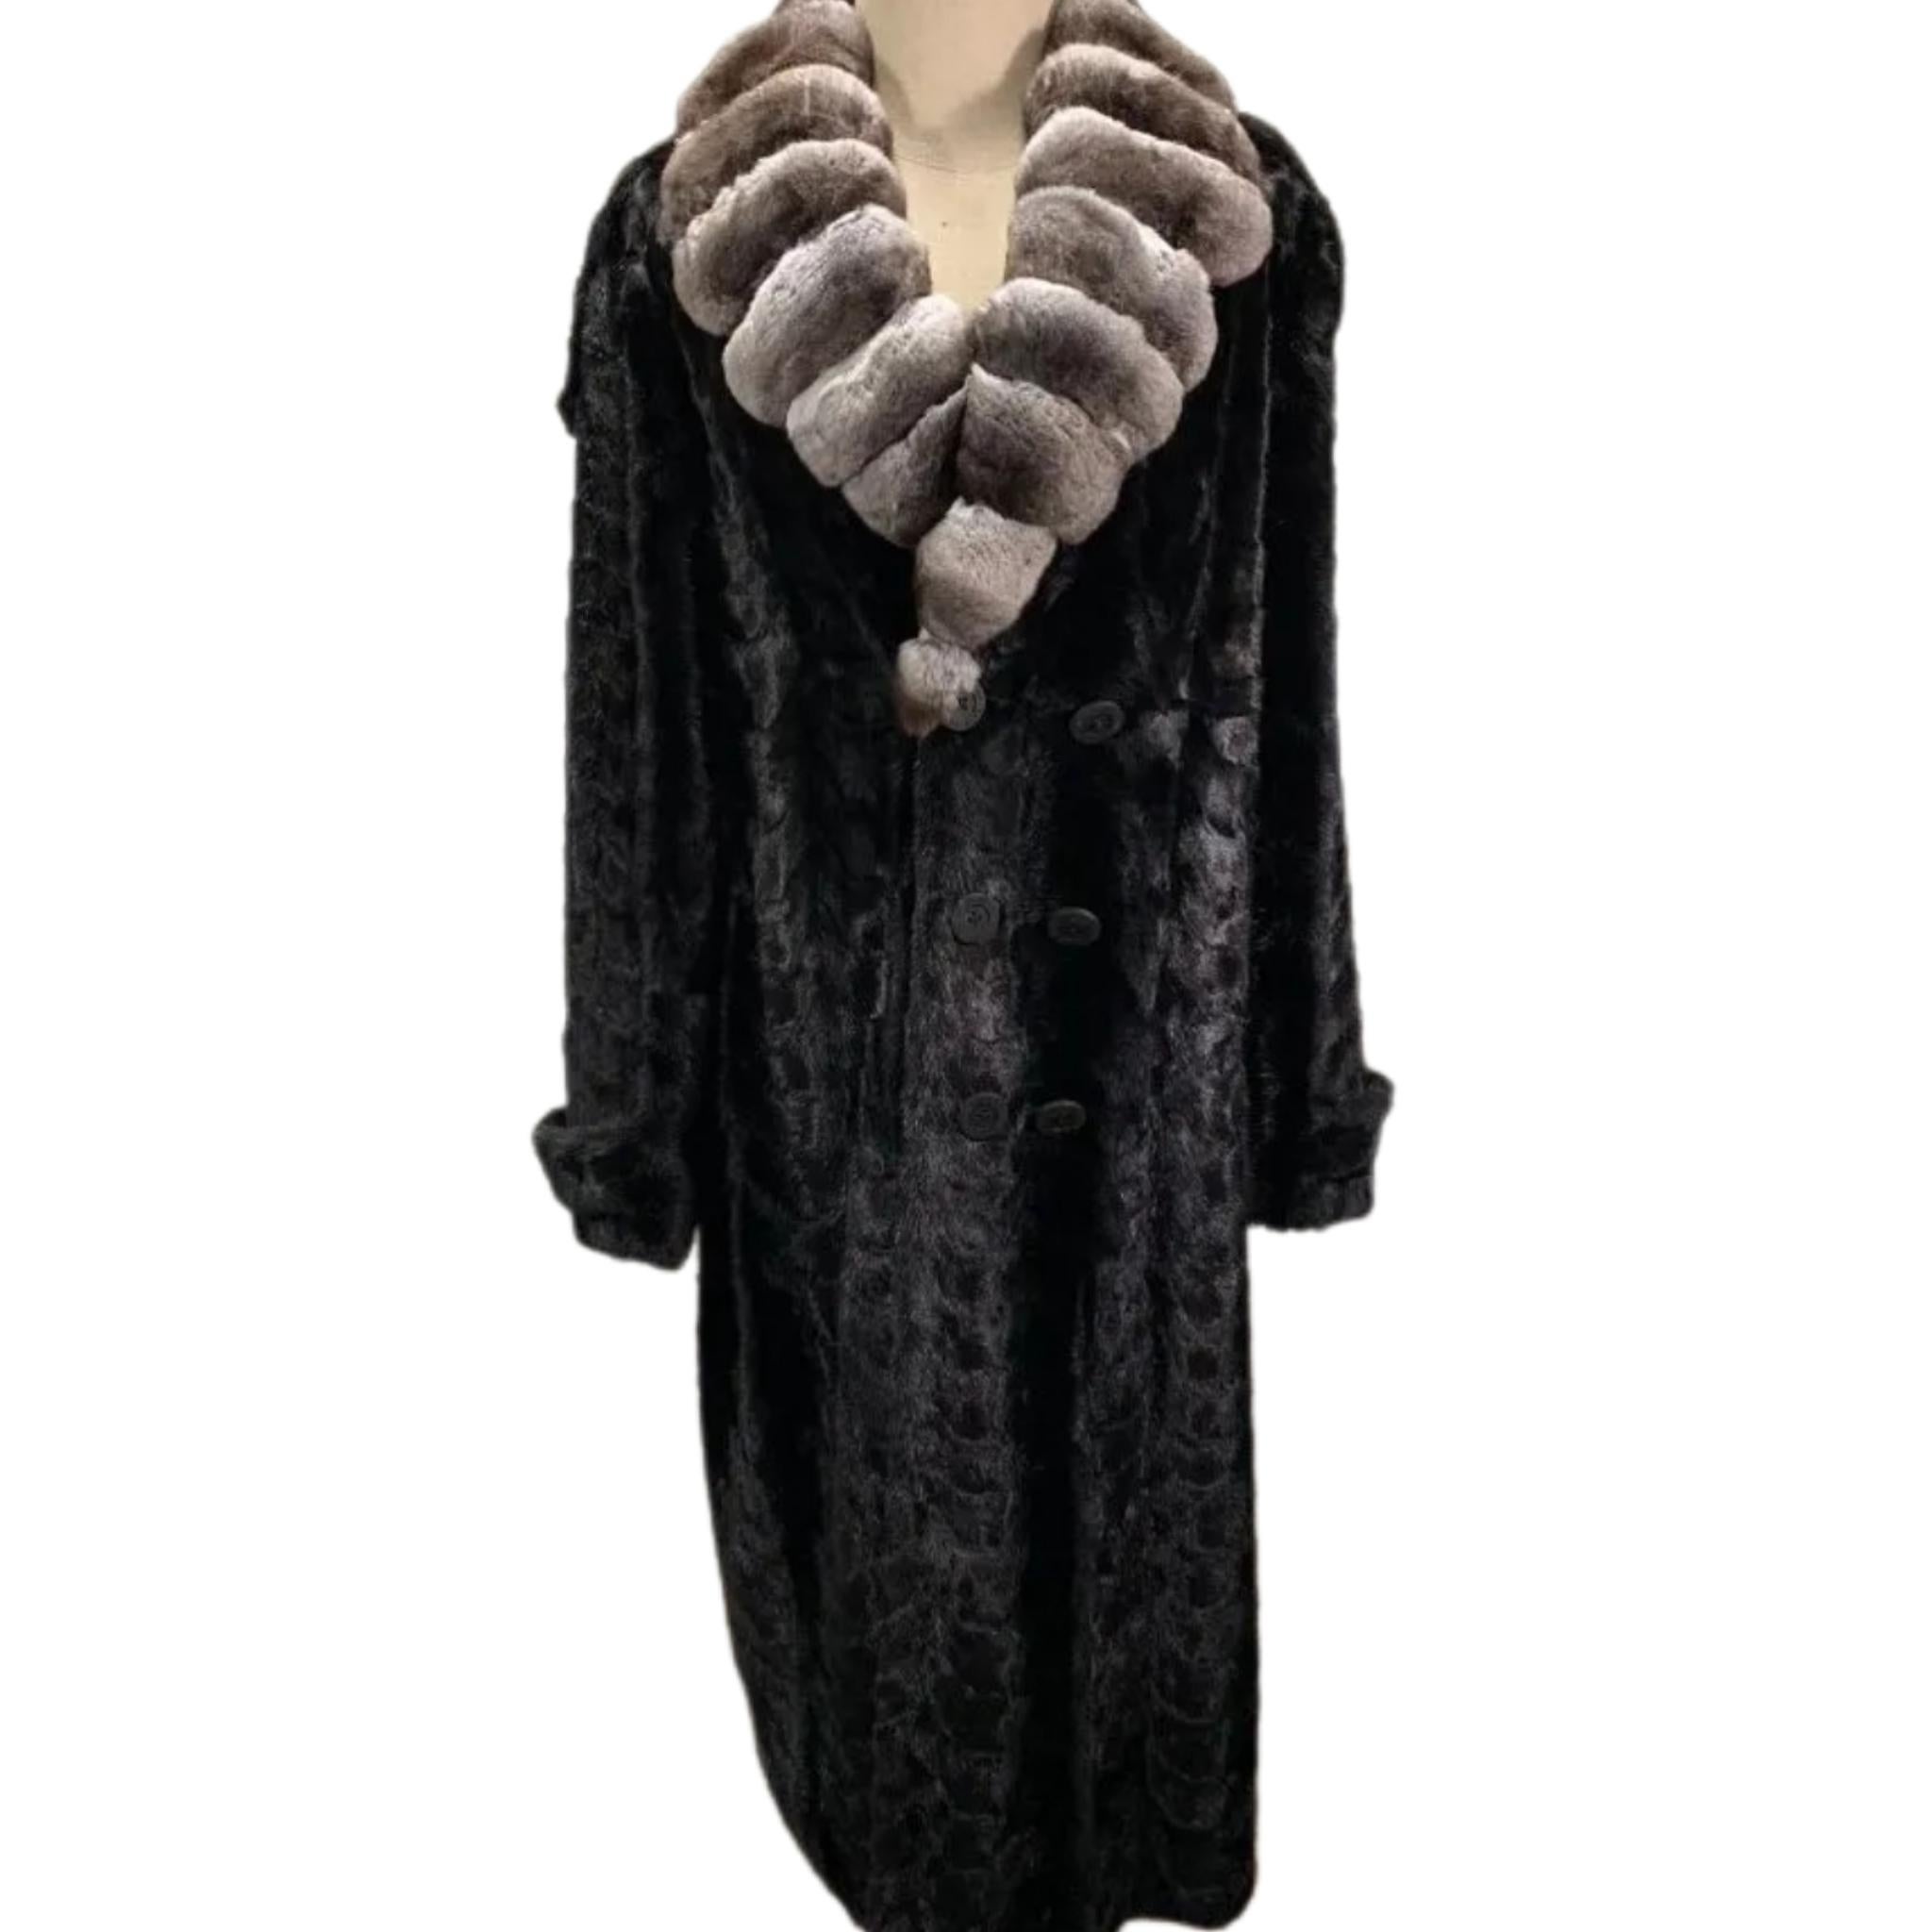 PRODUCT DESCRIPTION:

Brand new luxurious men's Mink fur coat Chinchilla empress fur collar exclusive Blackglama skins 

Condition: Brand New

Closure: Buttons

Color: Black

Material: Mink and chinchilla

Garment type: Coat

Sleeves: